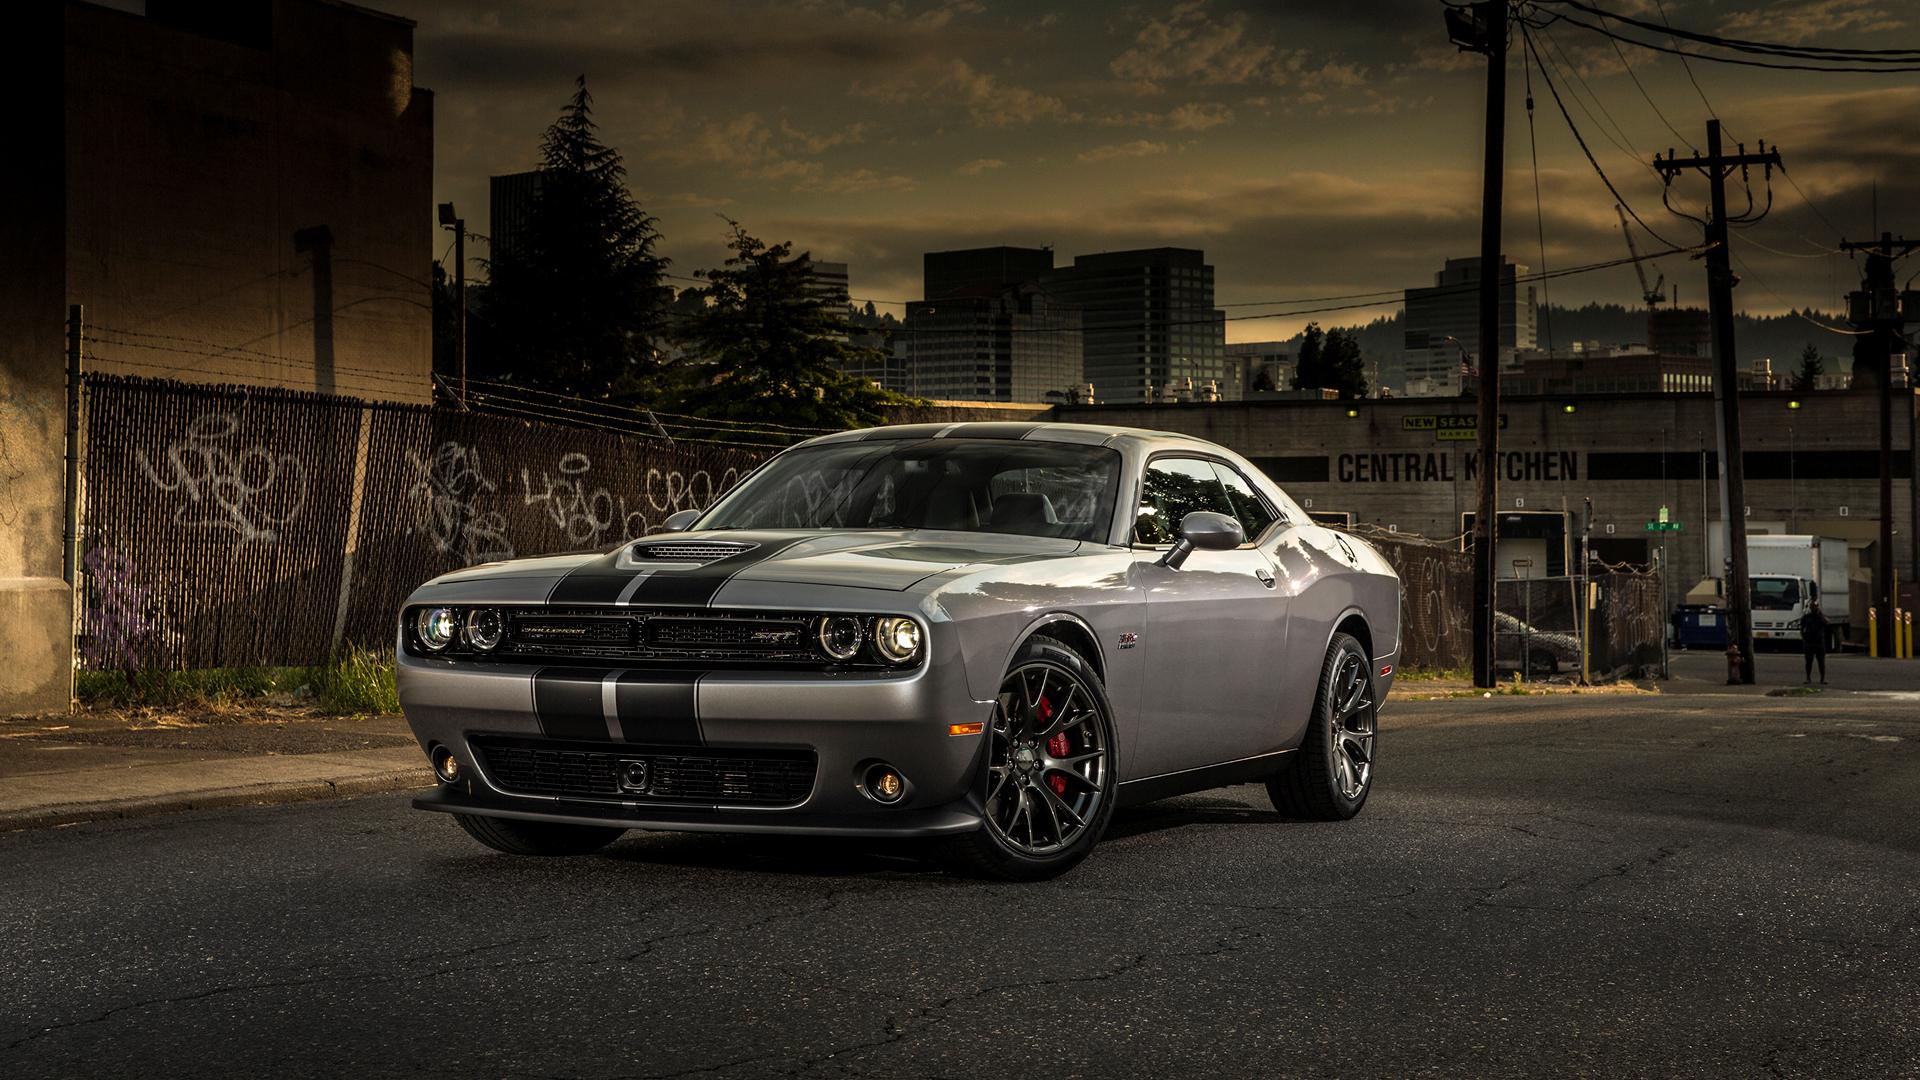 Geous Dodge Challenger Wallpaper Full HD Pictures